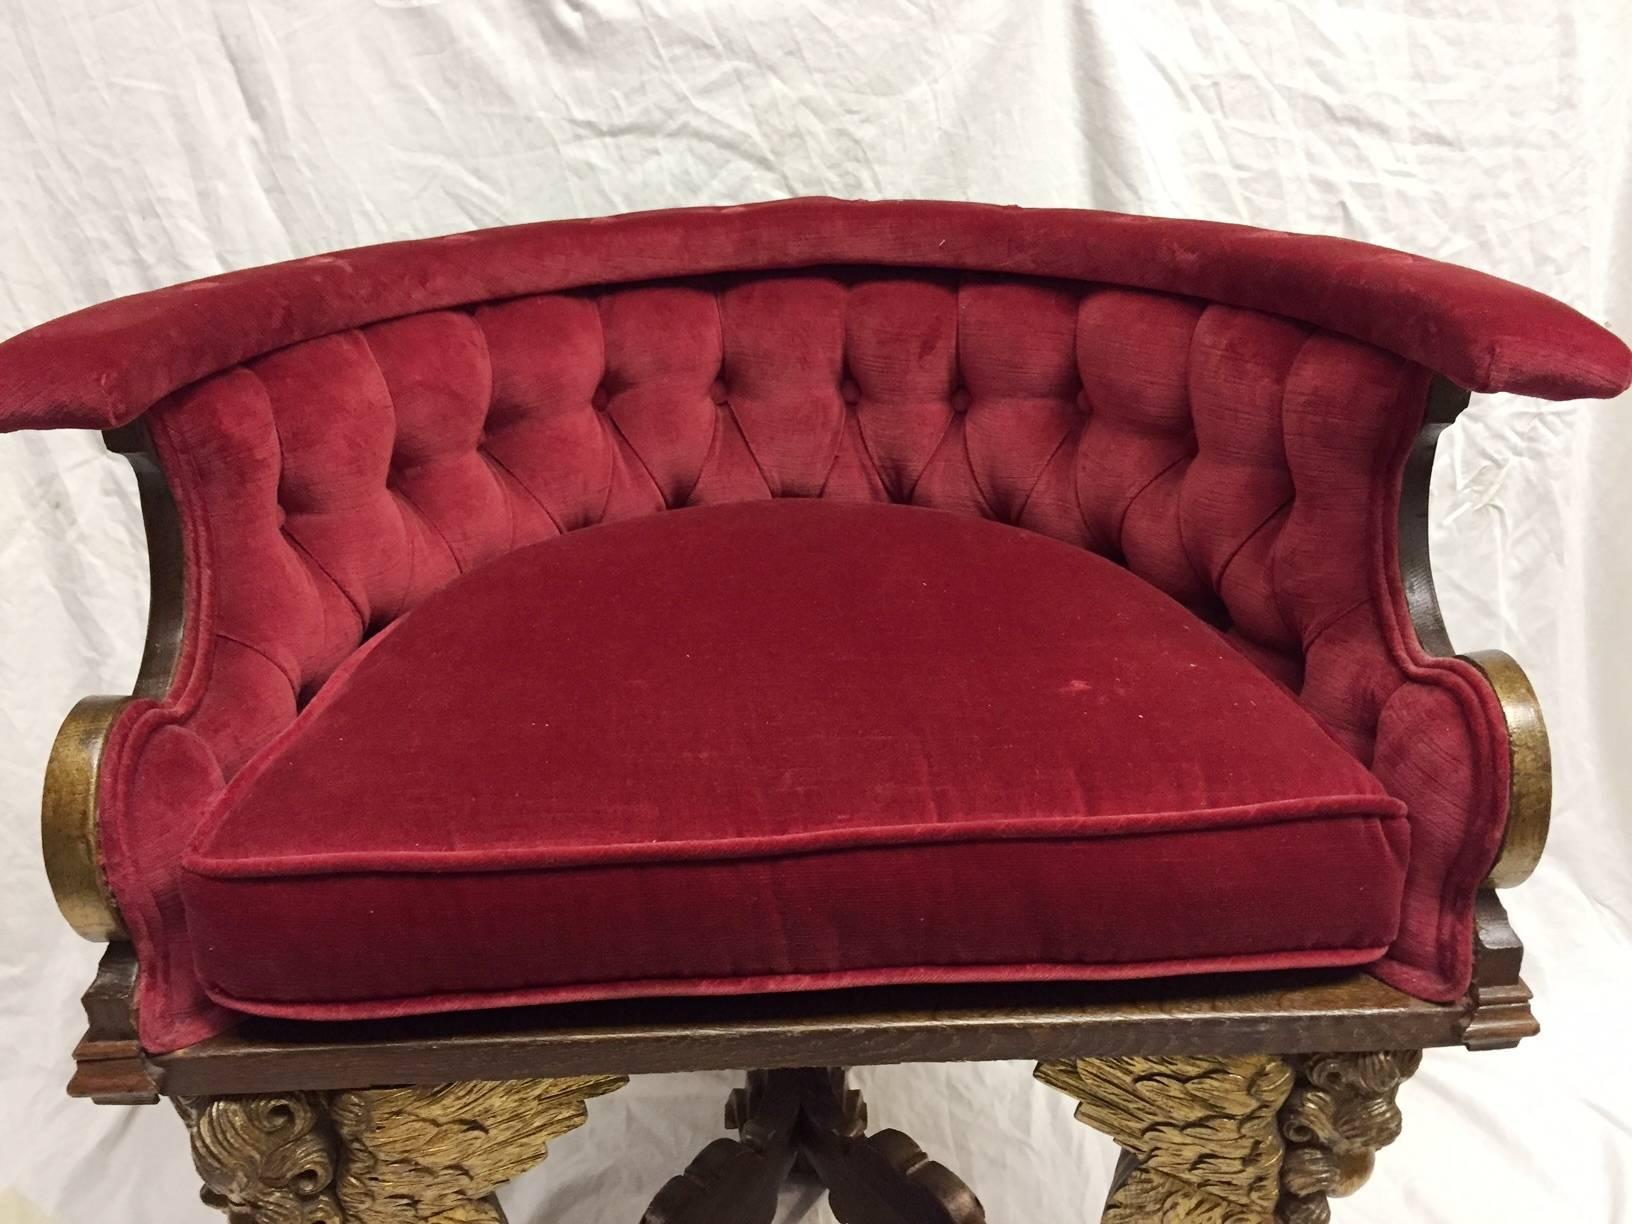 Extravagant 19th century Italian Baroque style carved giltwood and upholstered ladies chair. The carved parcel-gilt back decorated with giltwood scrolling acanthus leaf motif over three beautifully crafted angel legs conjoined by Y-form stretcher,